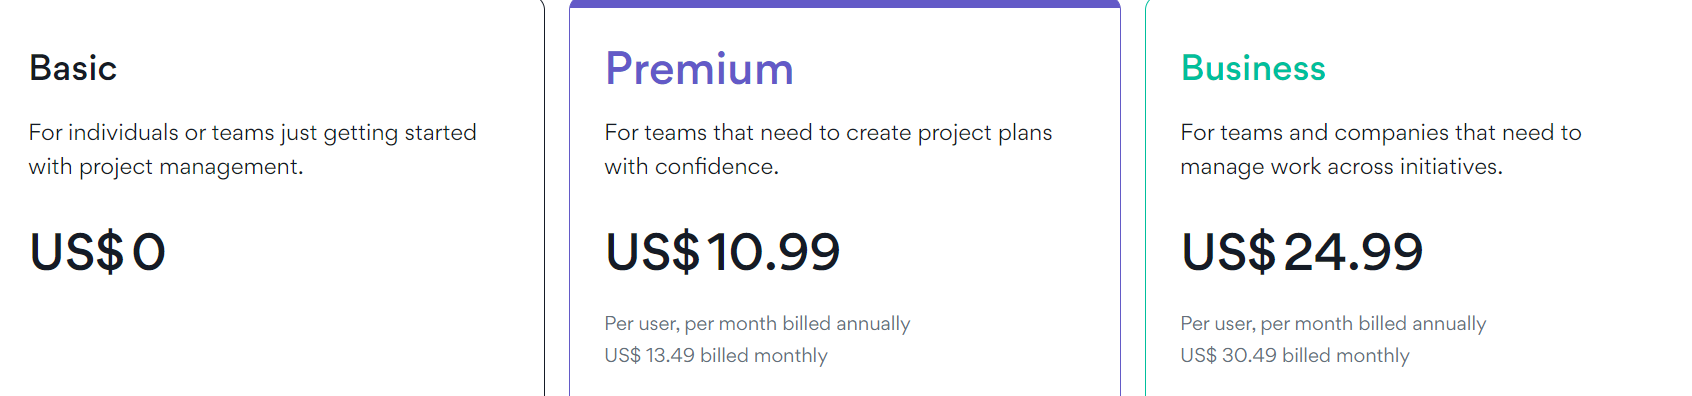 14 Best Project Management Software For Creative Agencies. #3 Asana. Asana's pricing